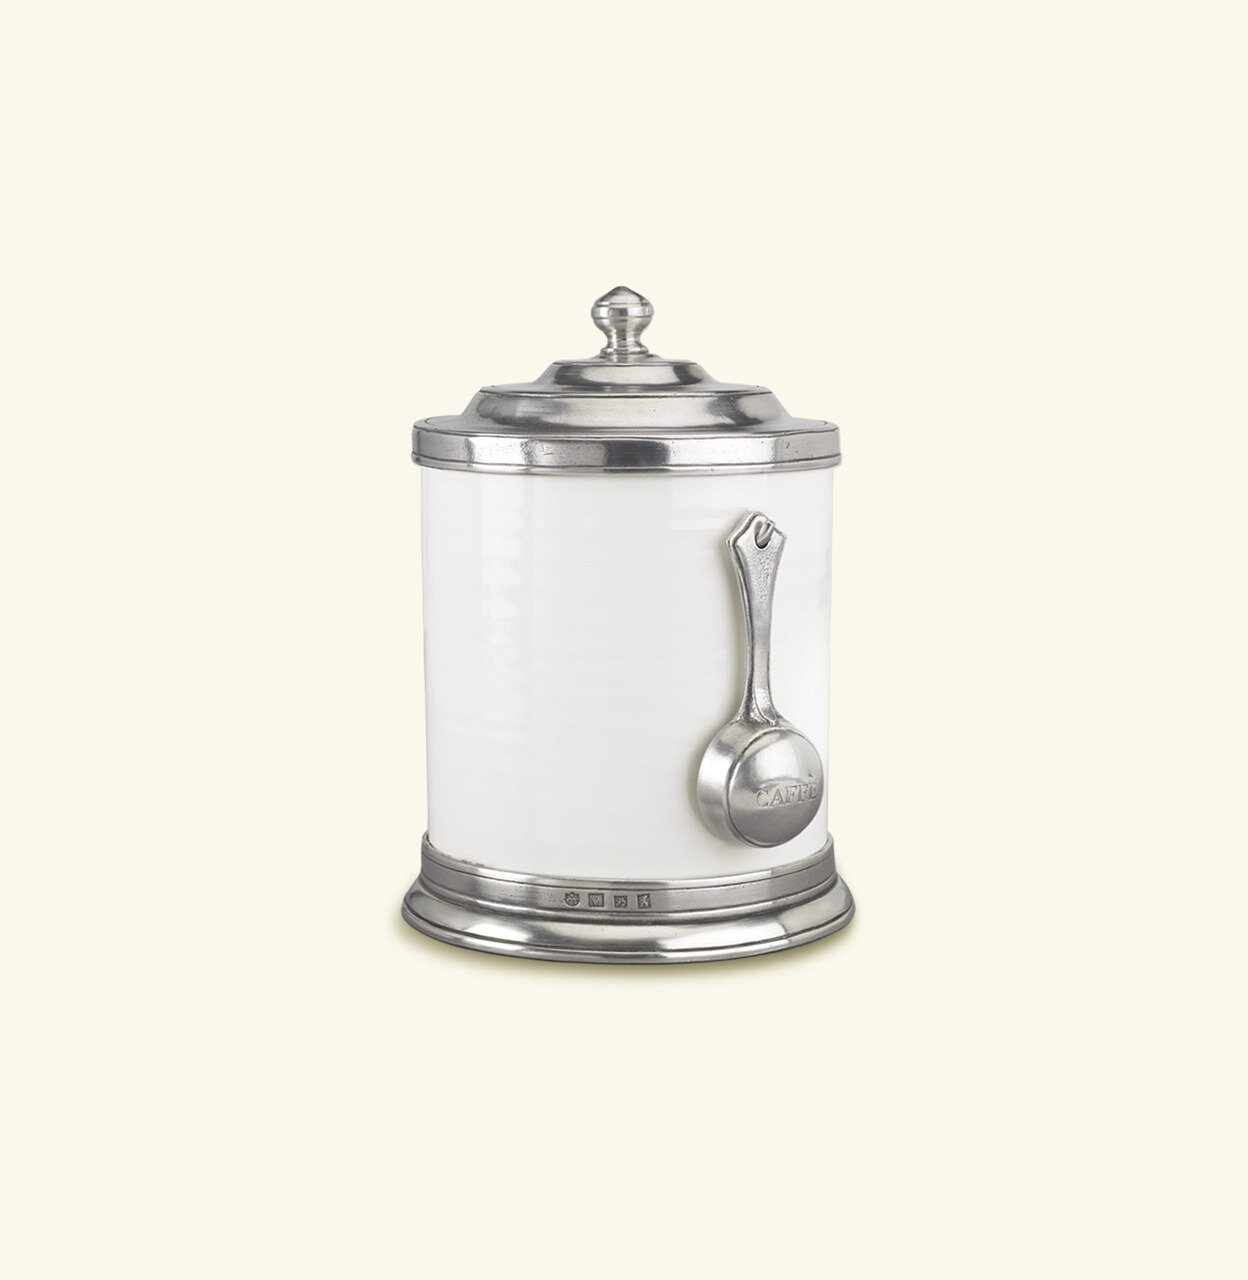 Match Pewter Convivio Caff Canister